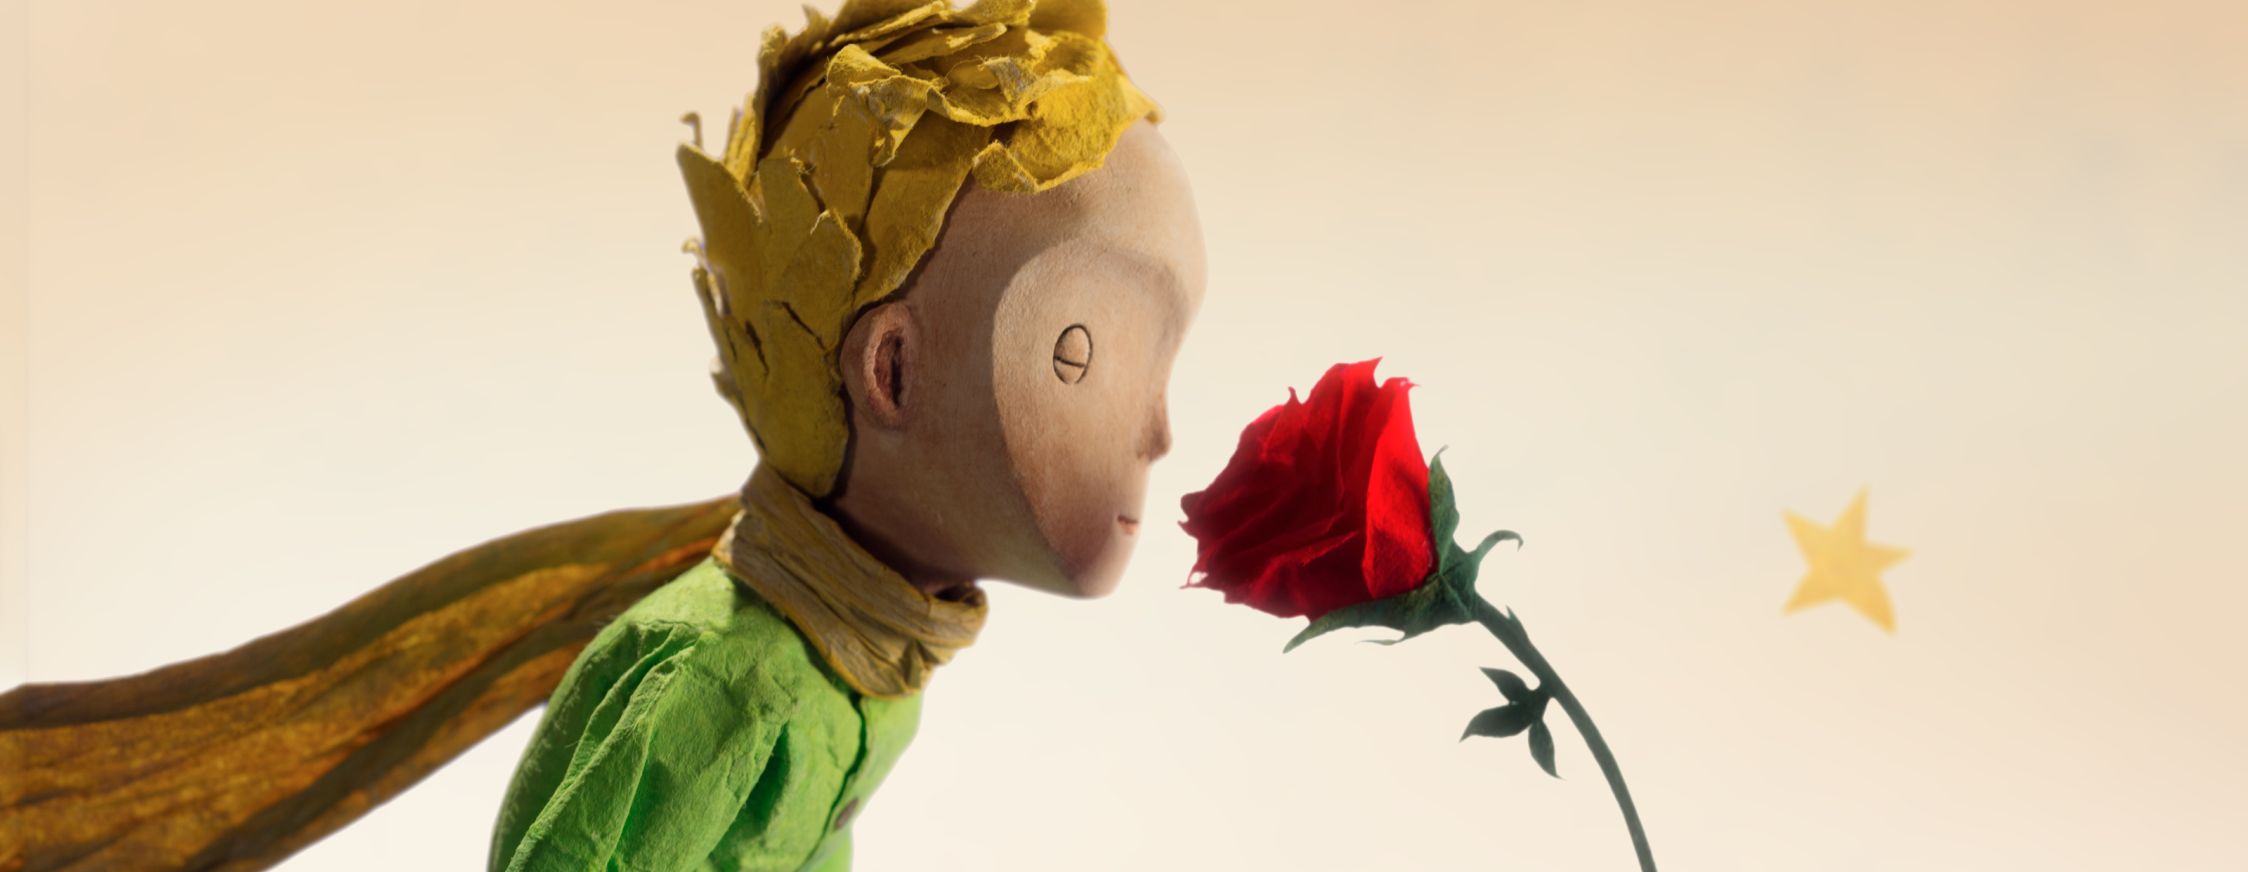 the little prince, movie